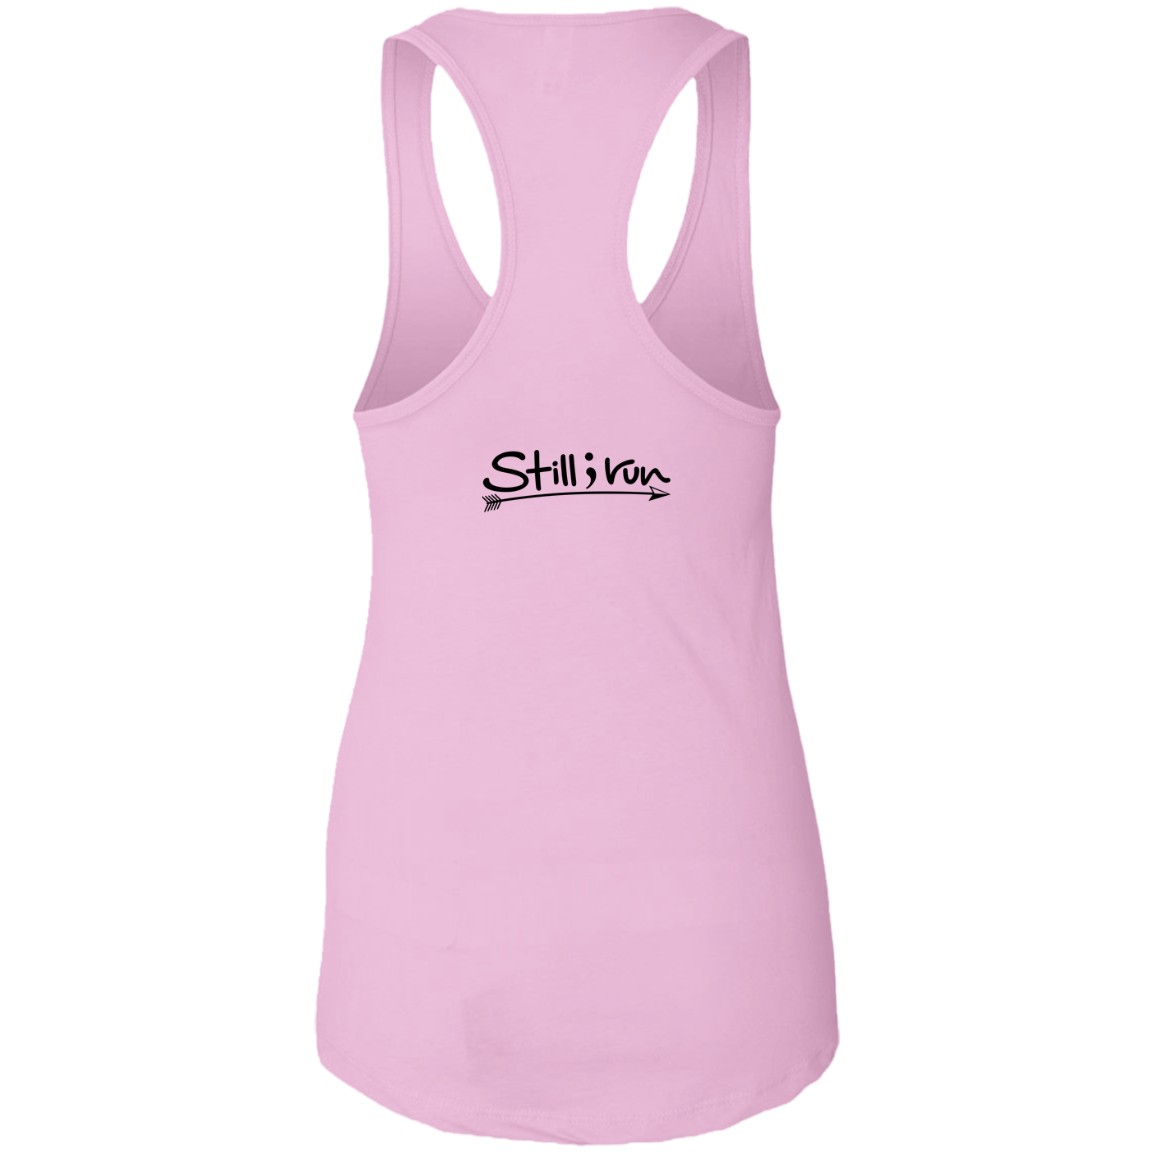 Running for My Mental Health - Fitted Racerback Tank